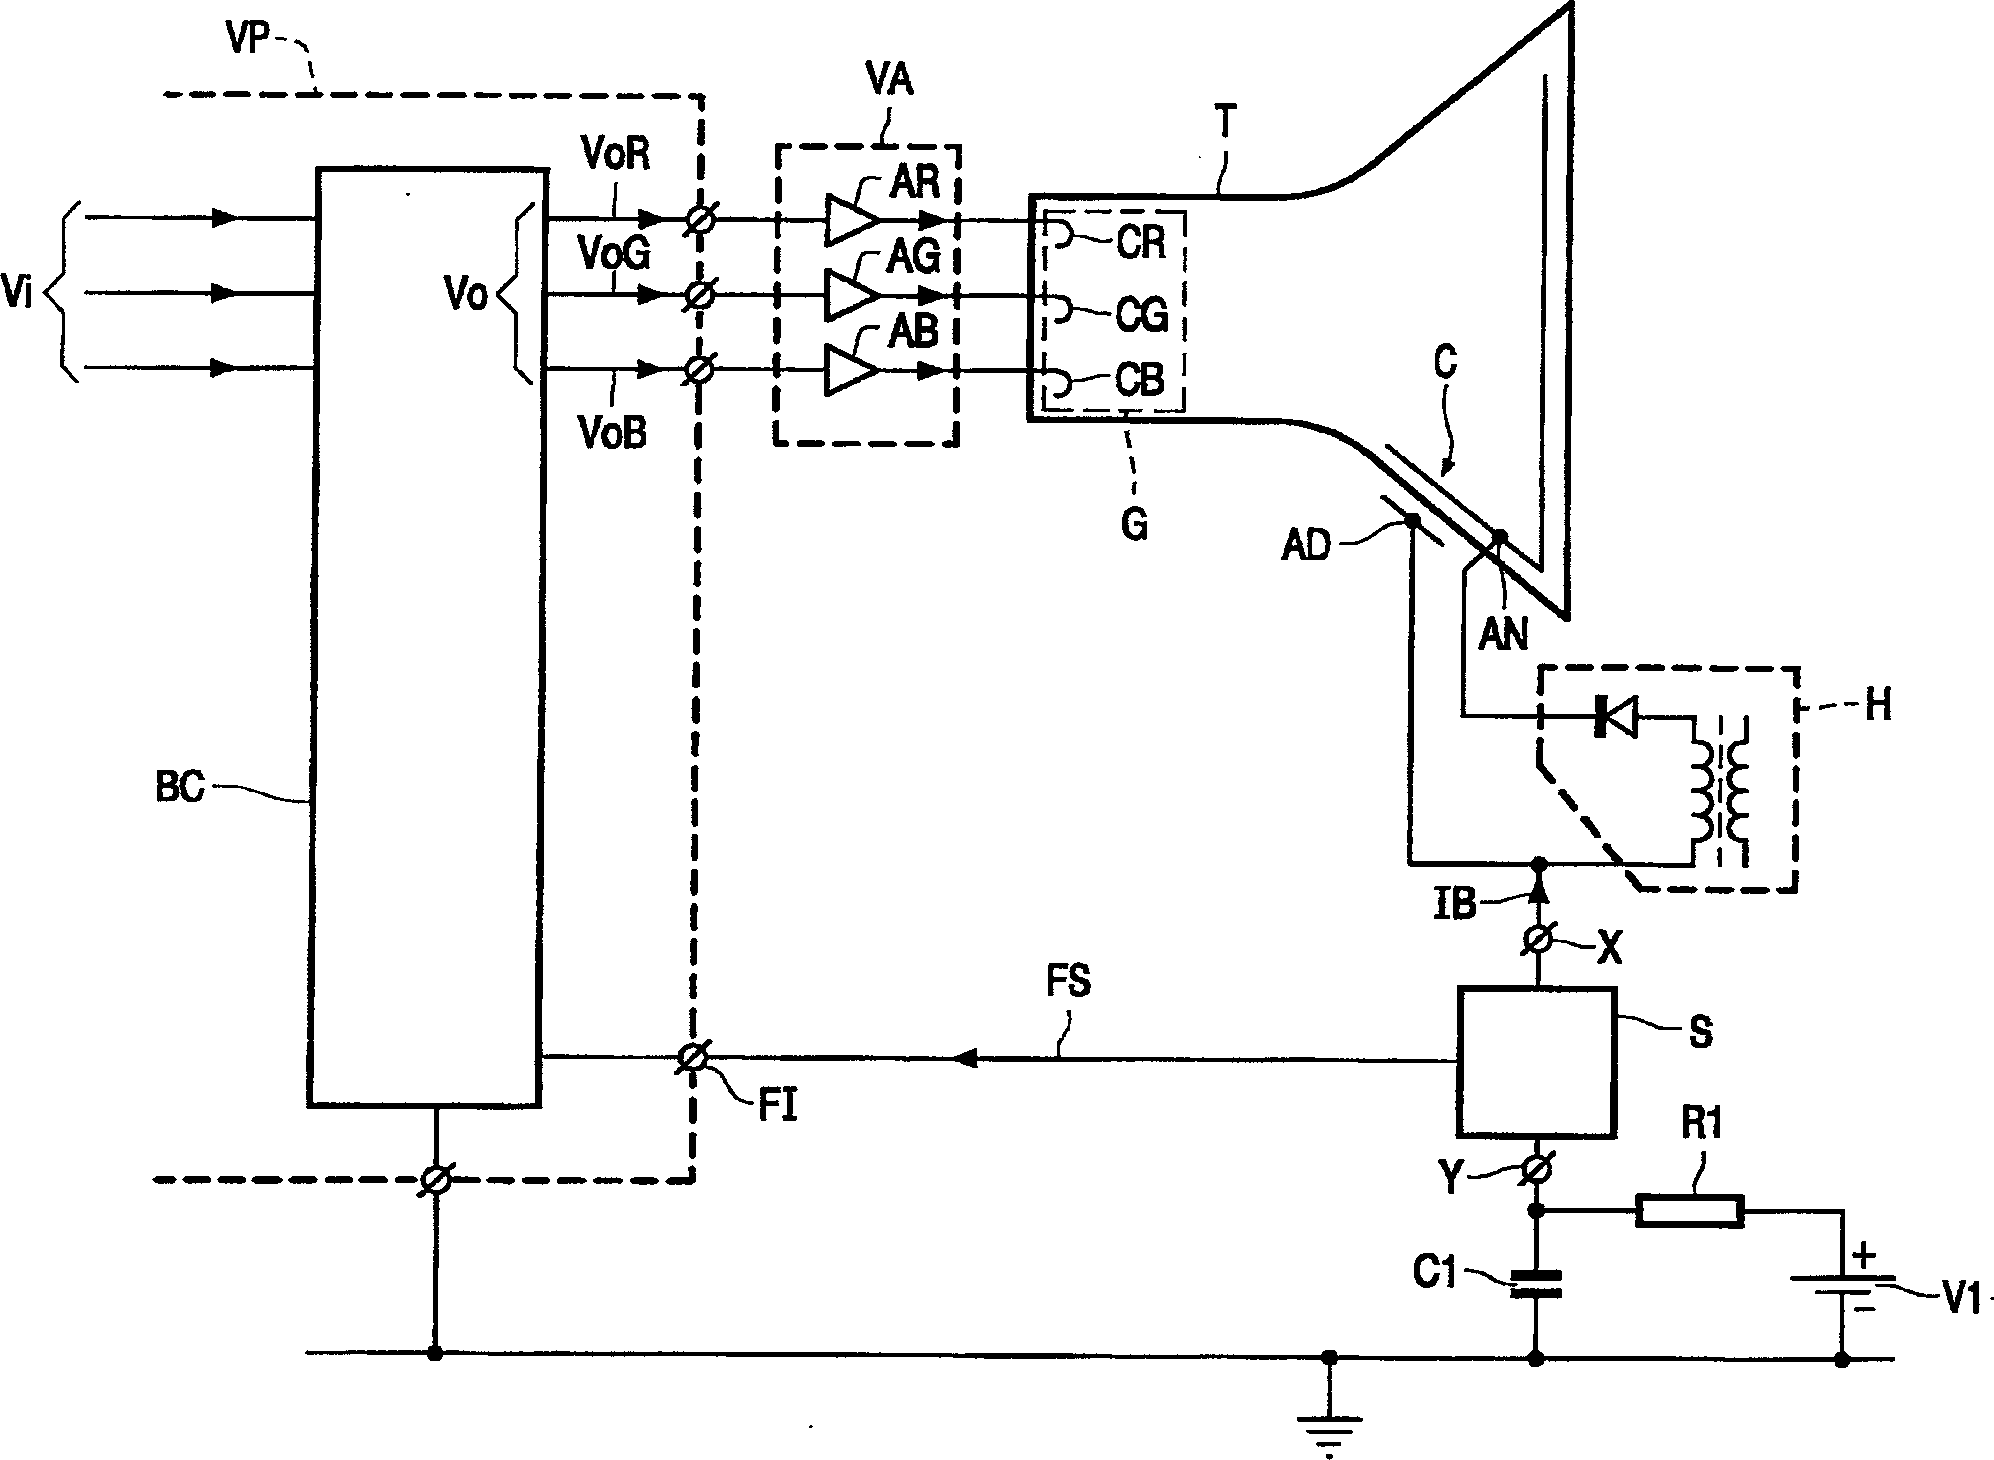 Display device comprising a cathode ray tube